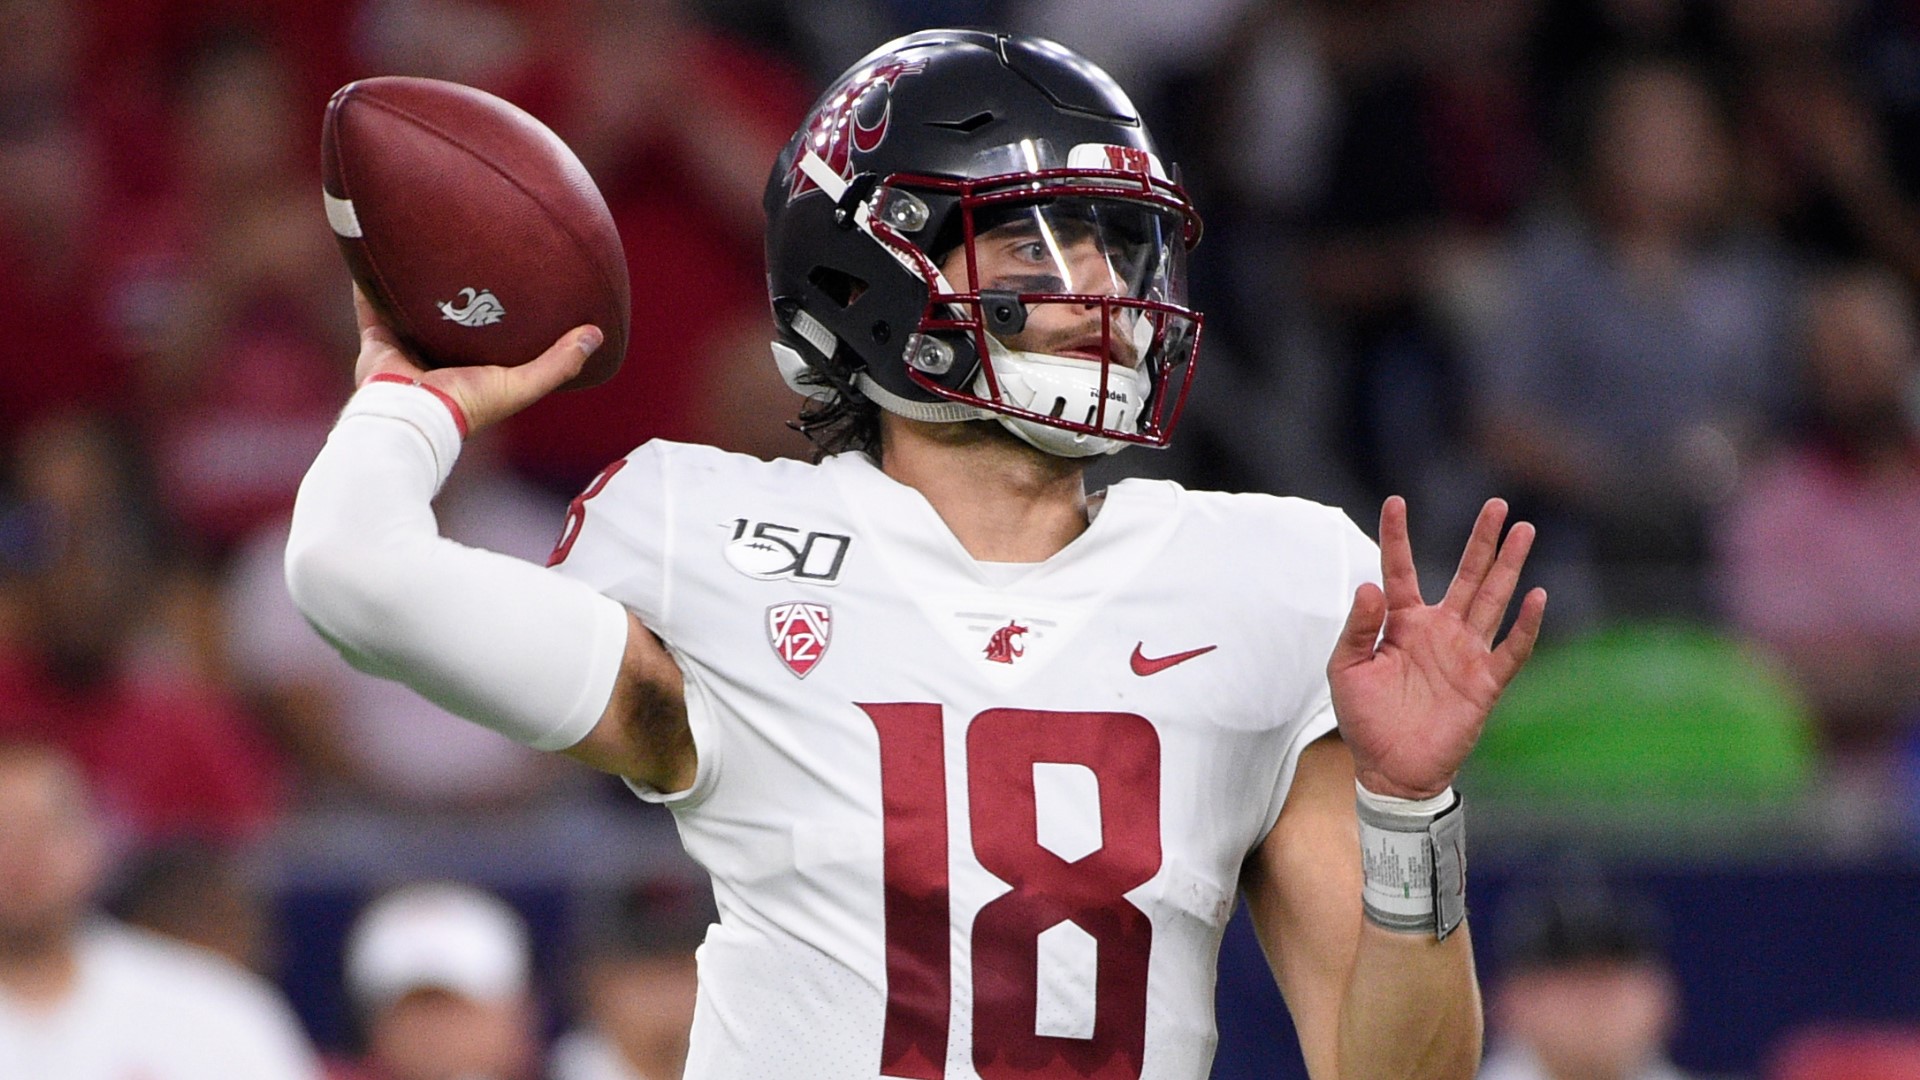 Now that non-conference is over and we know more about the Pac-12, it's time to look back on our initial prediction of what WSU's record would be this season